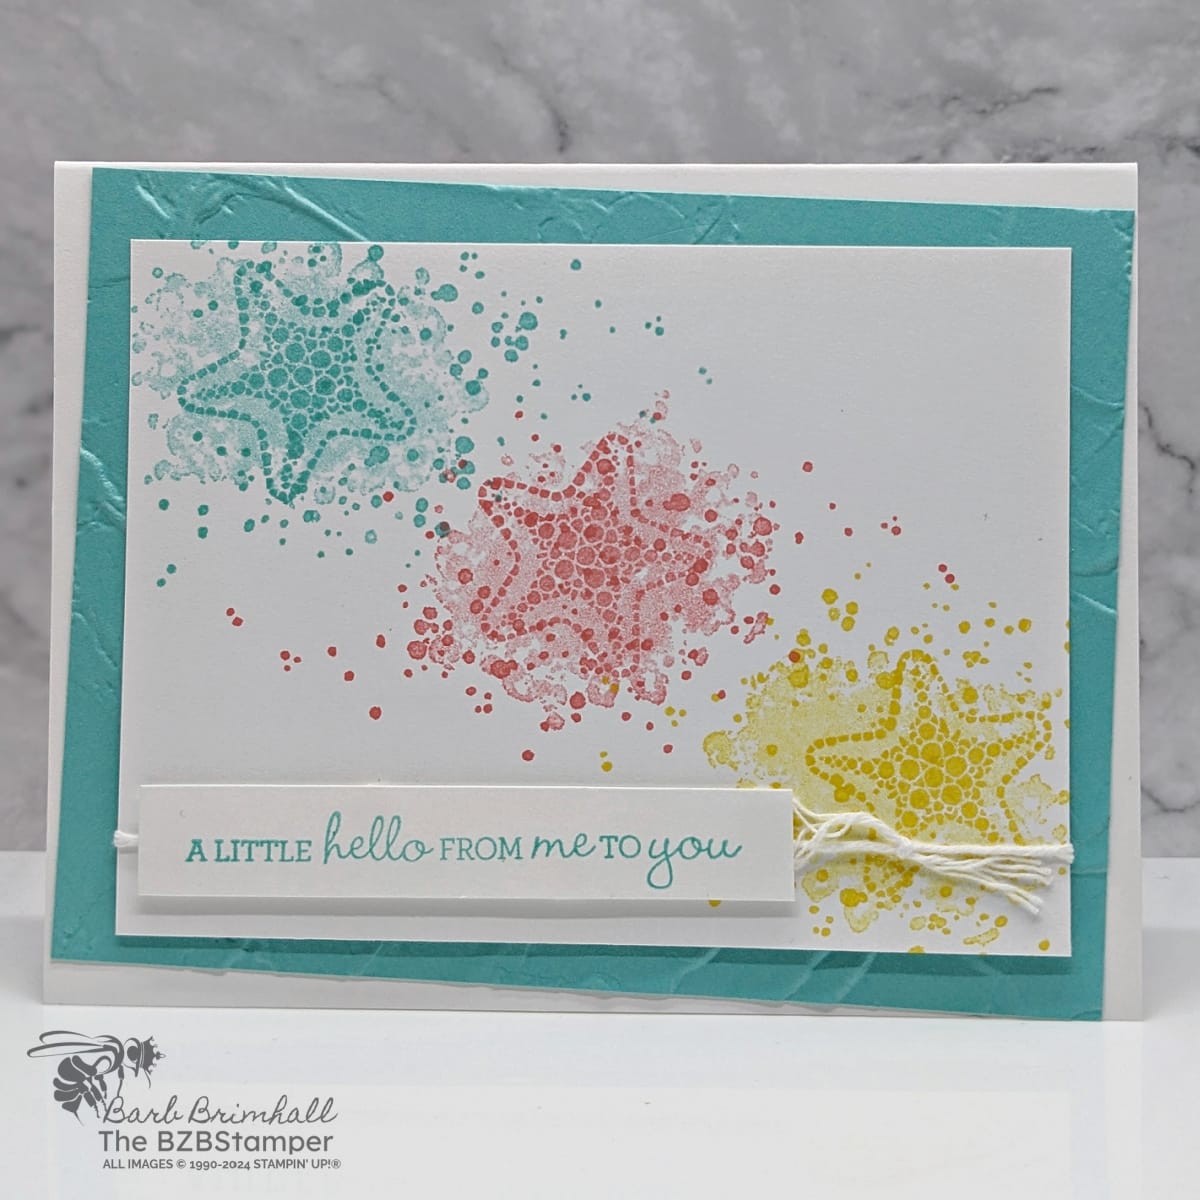 A Seaside Hello using the Sea Turtle Stamp Set with starfish seashells in blue, pink and yellow.  An embossed background and sentiment is "a little hello from me to you."